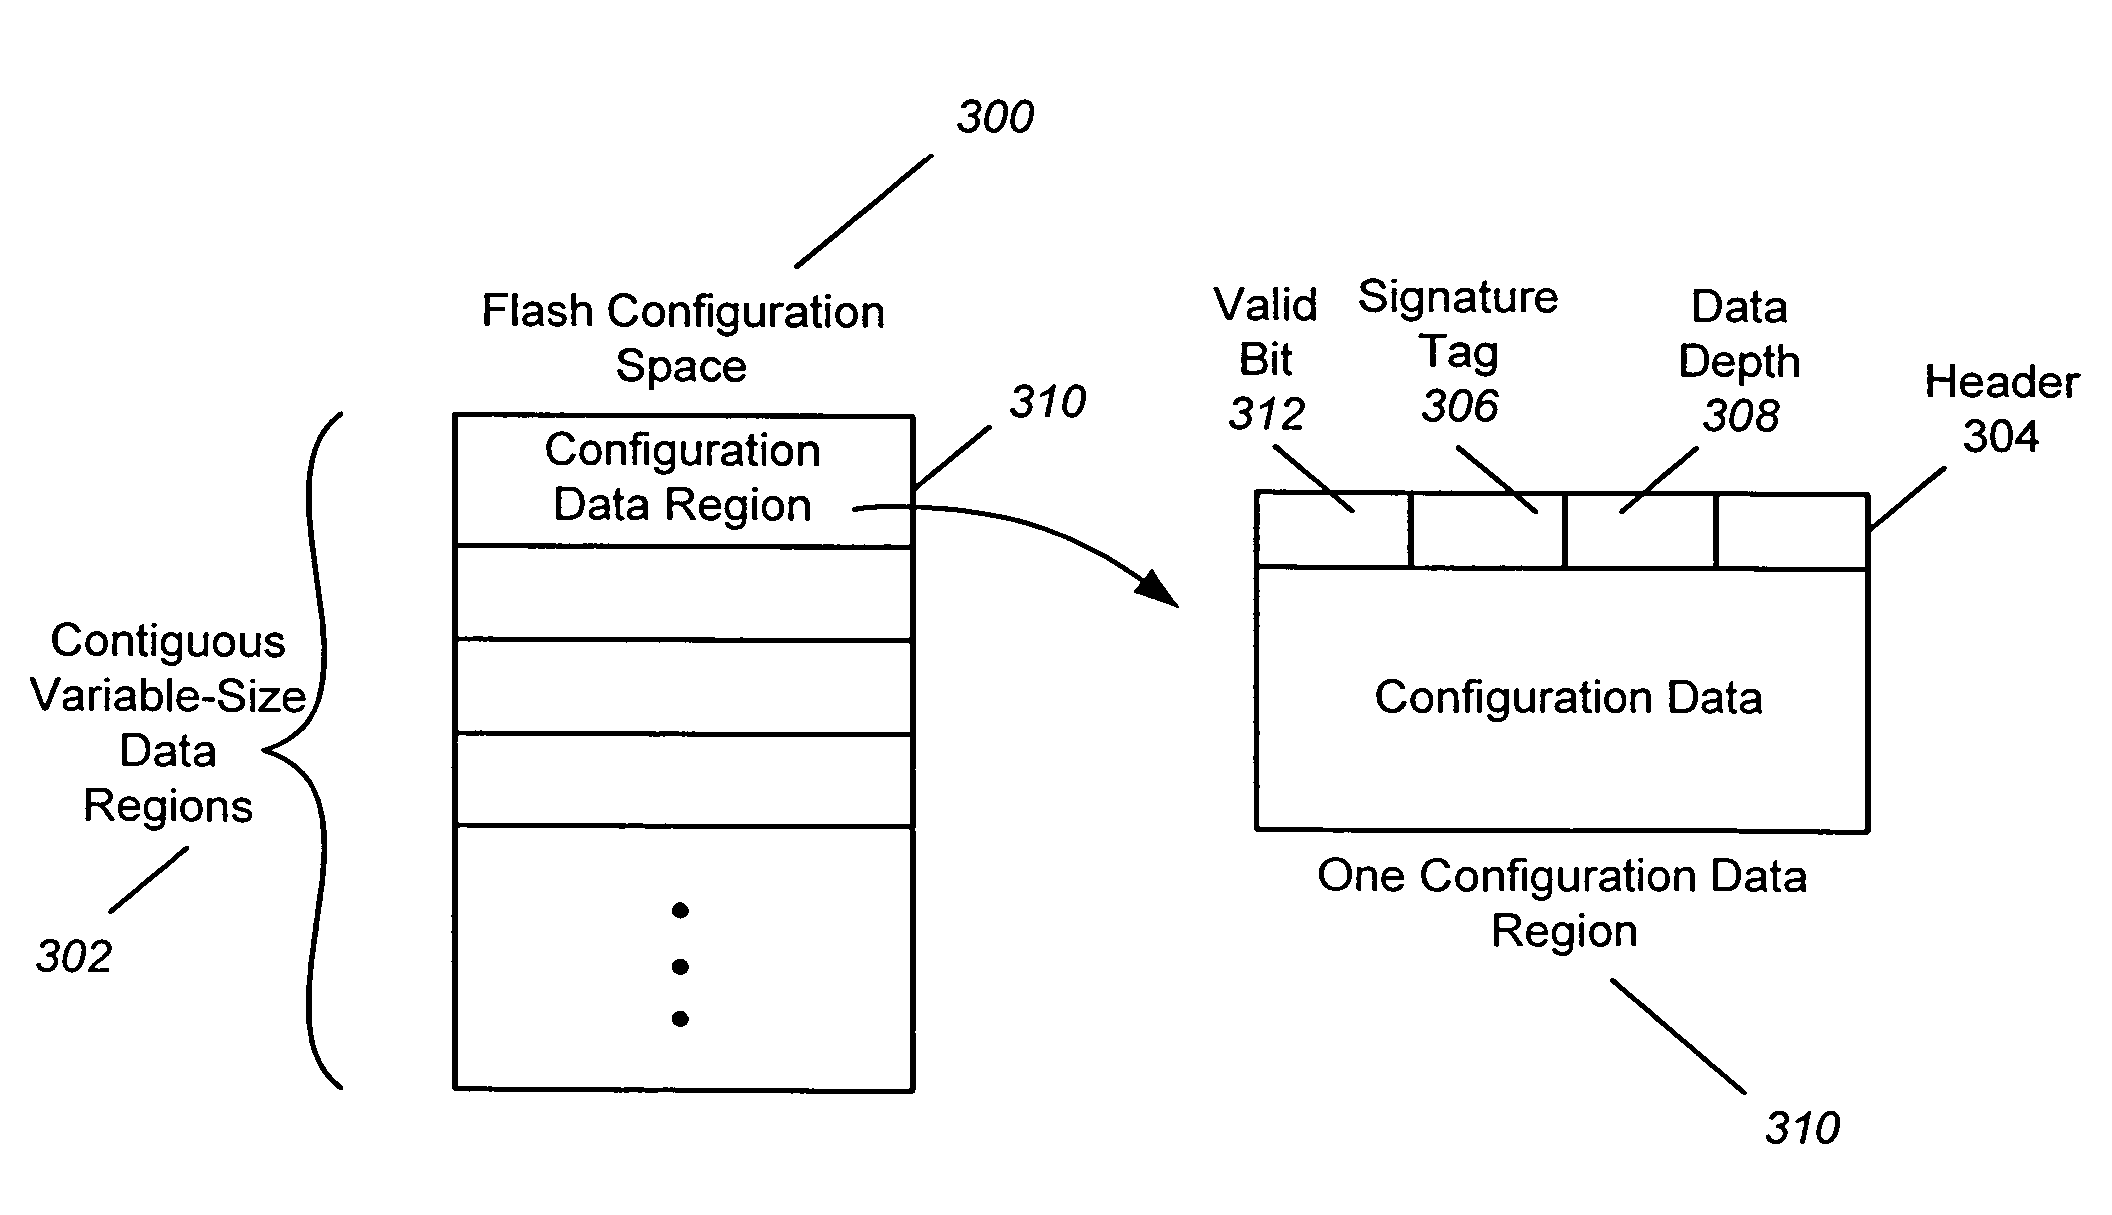 Managing configuration data in a flash configuration space in flash memory within a host interface port